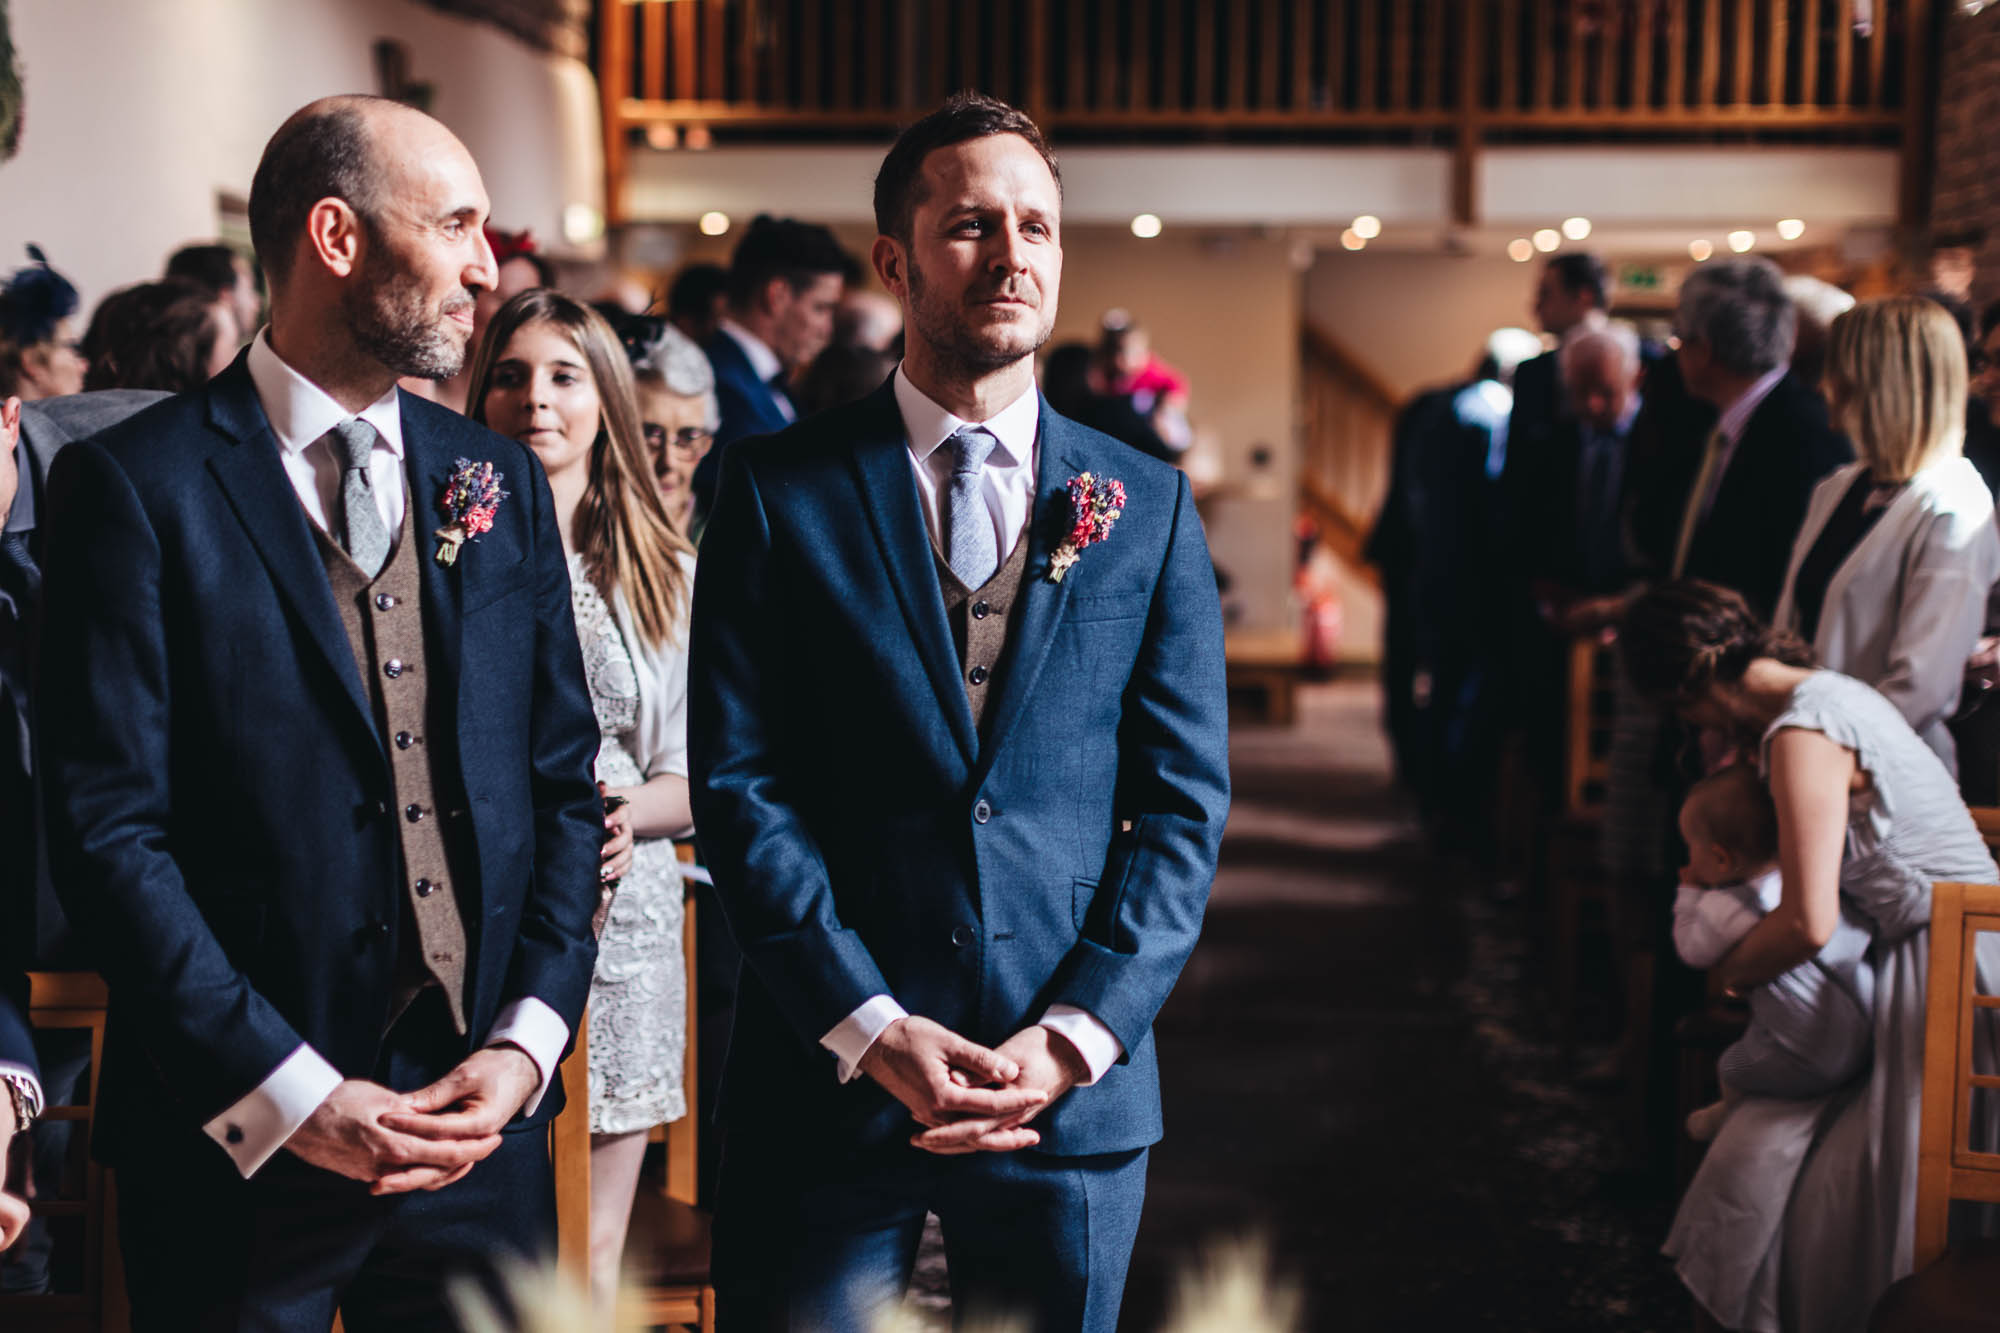 Groom and Best man wait for bride to walk down aisle with guests in background in wedding barn